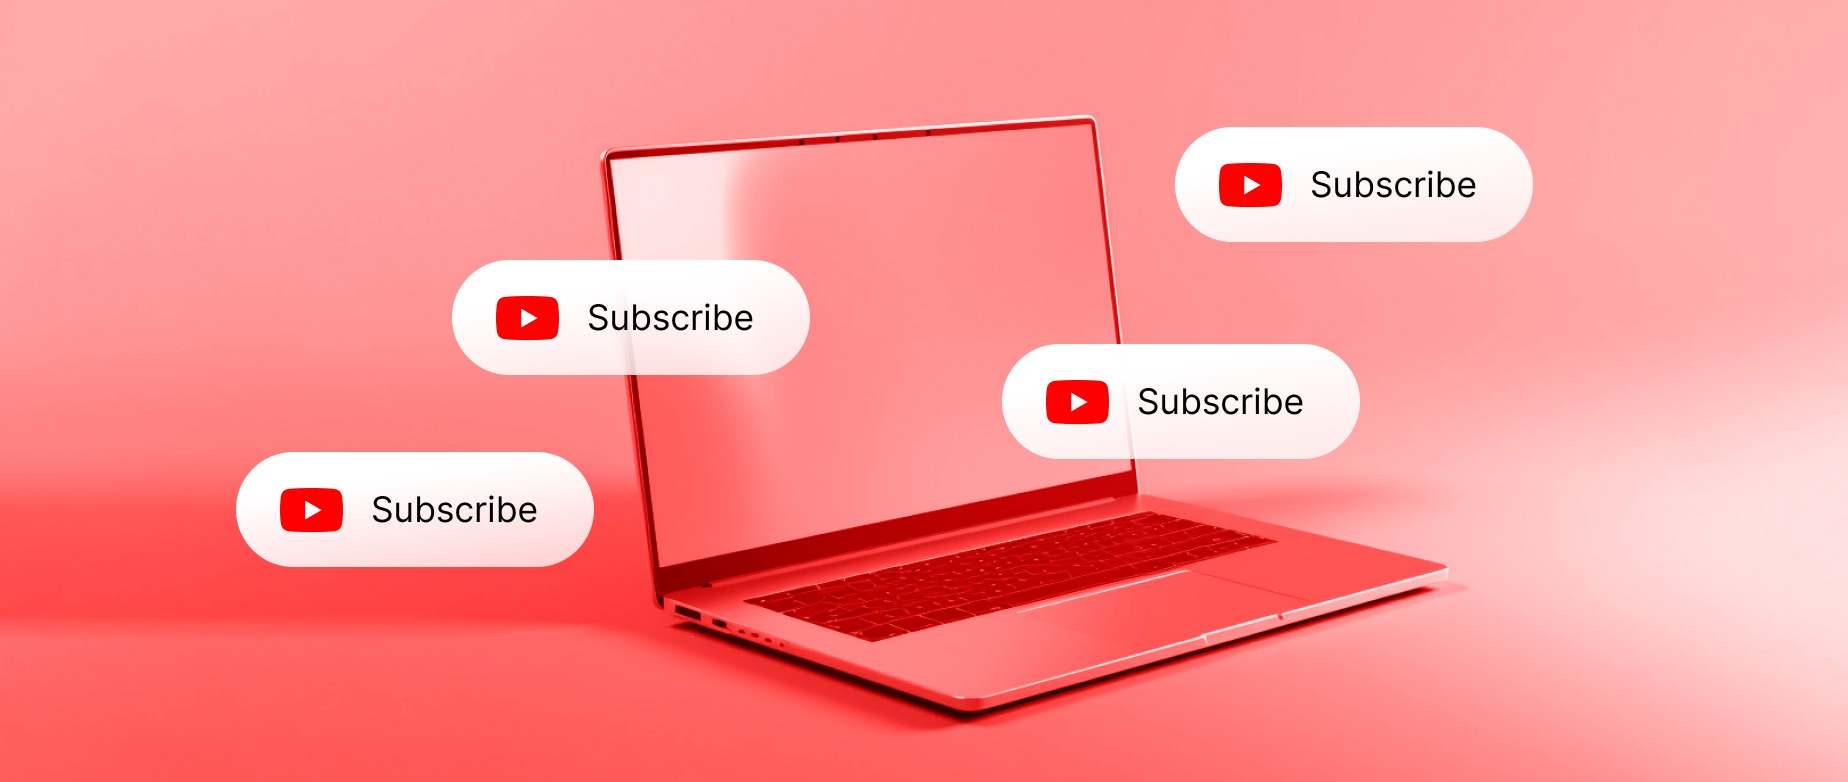 How to Manage Your YouTube Subscriptions Efficiently